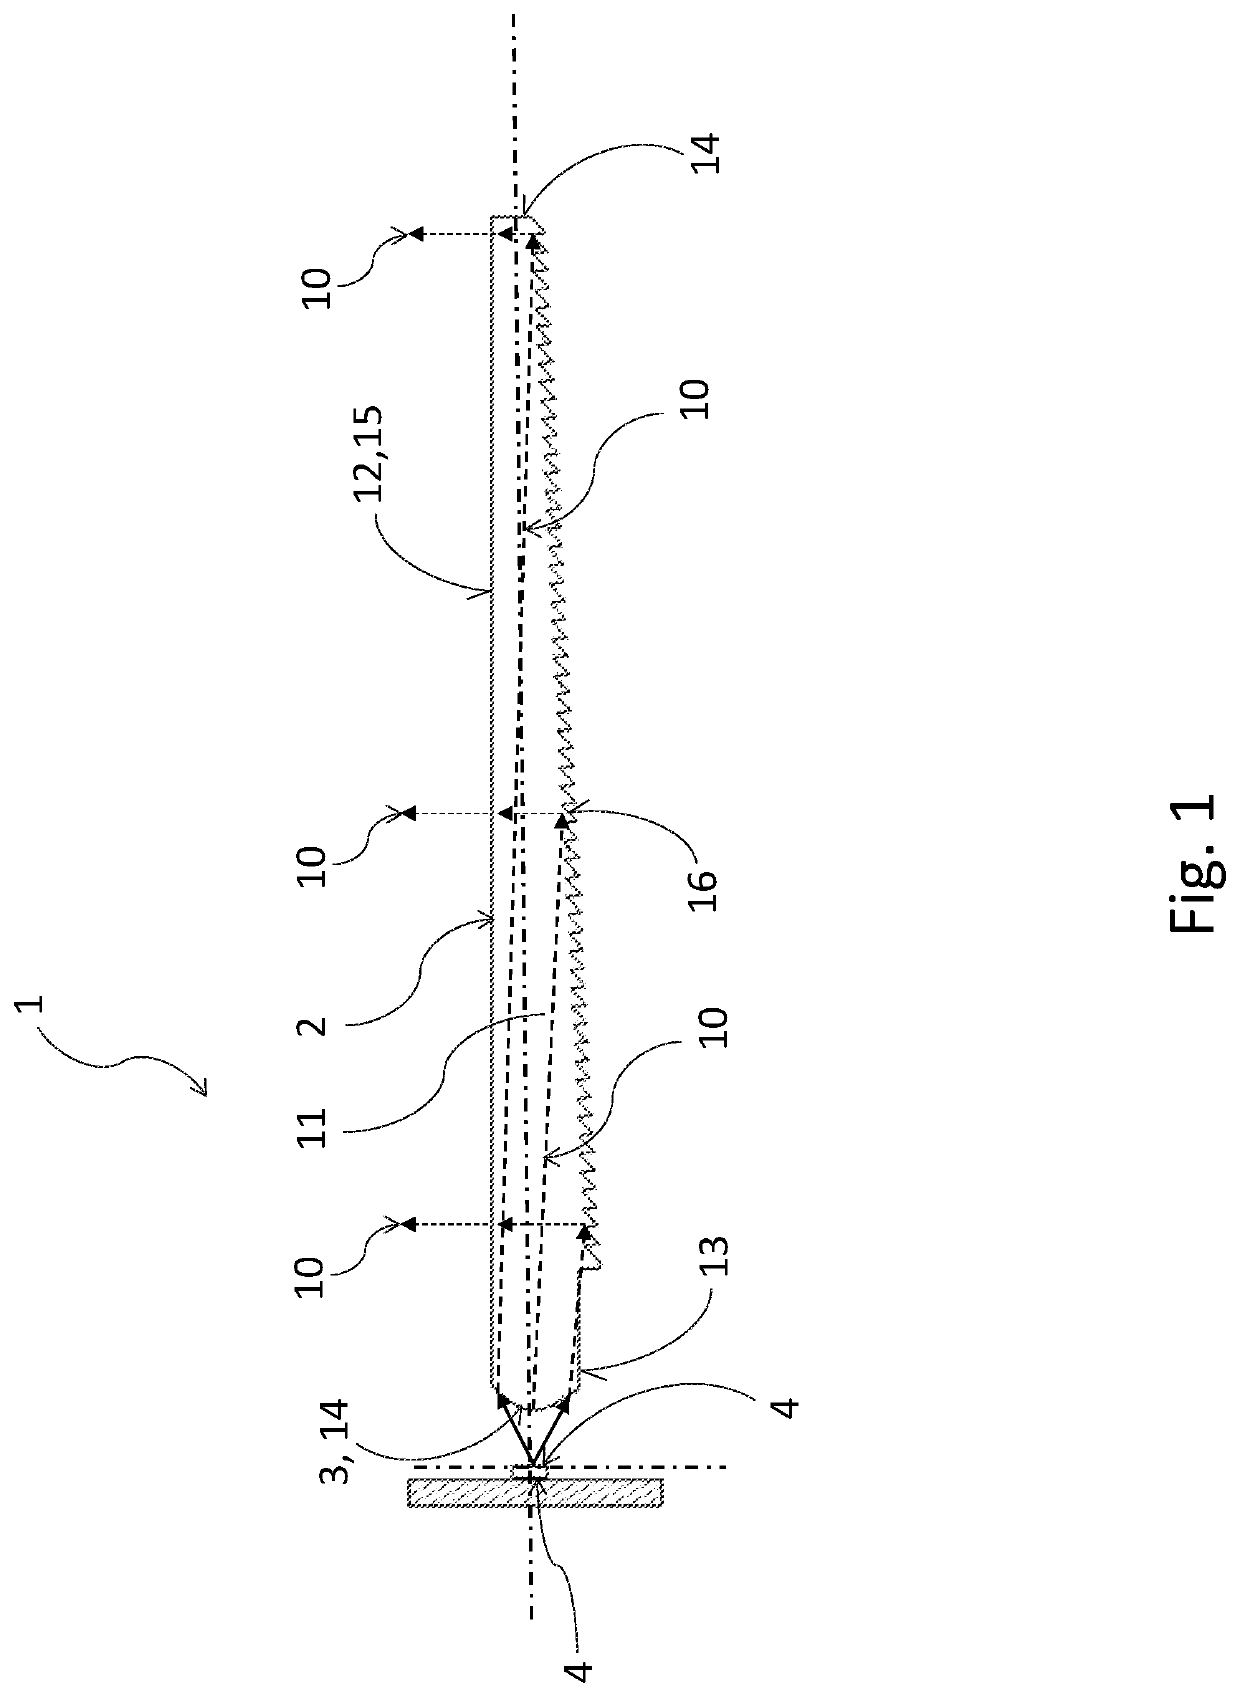 Light-guiding optical unit for a light device of motor vehicles